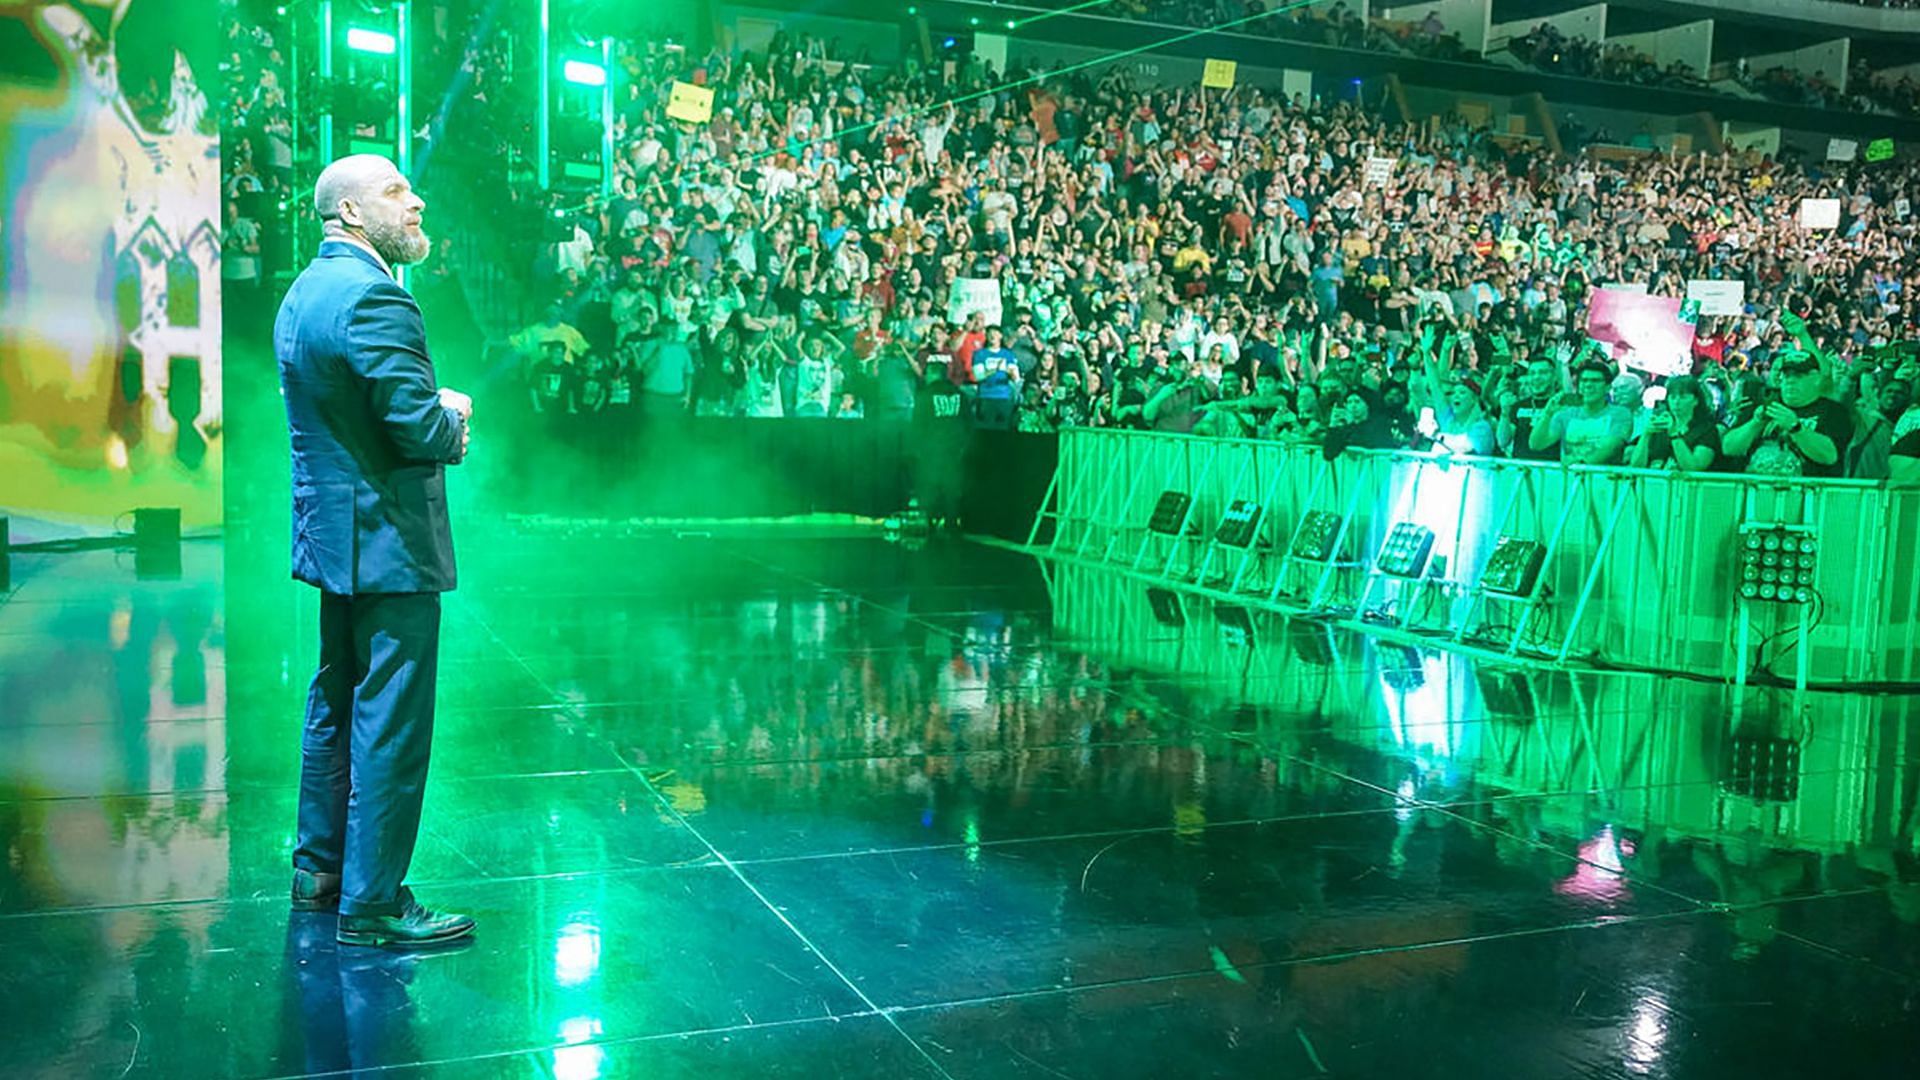 Triple H makes his entrance to cheers on WWE TV